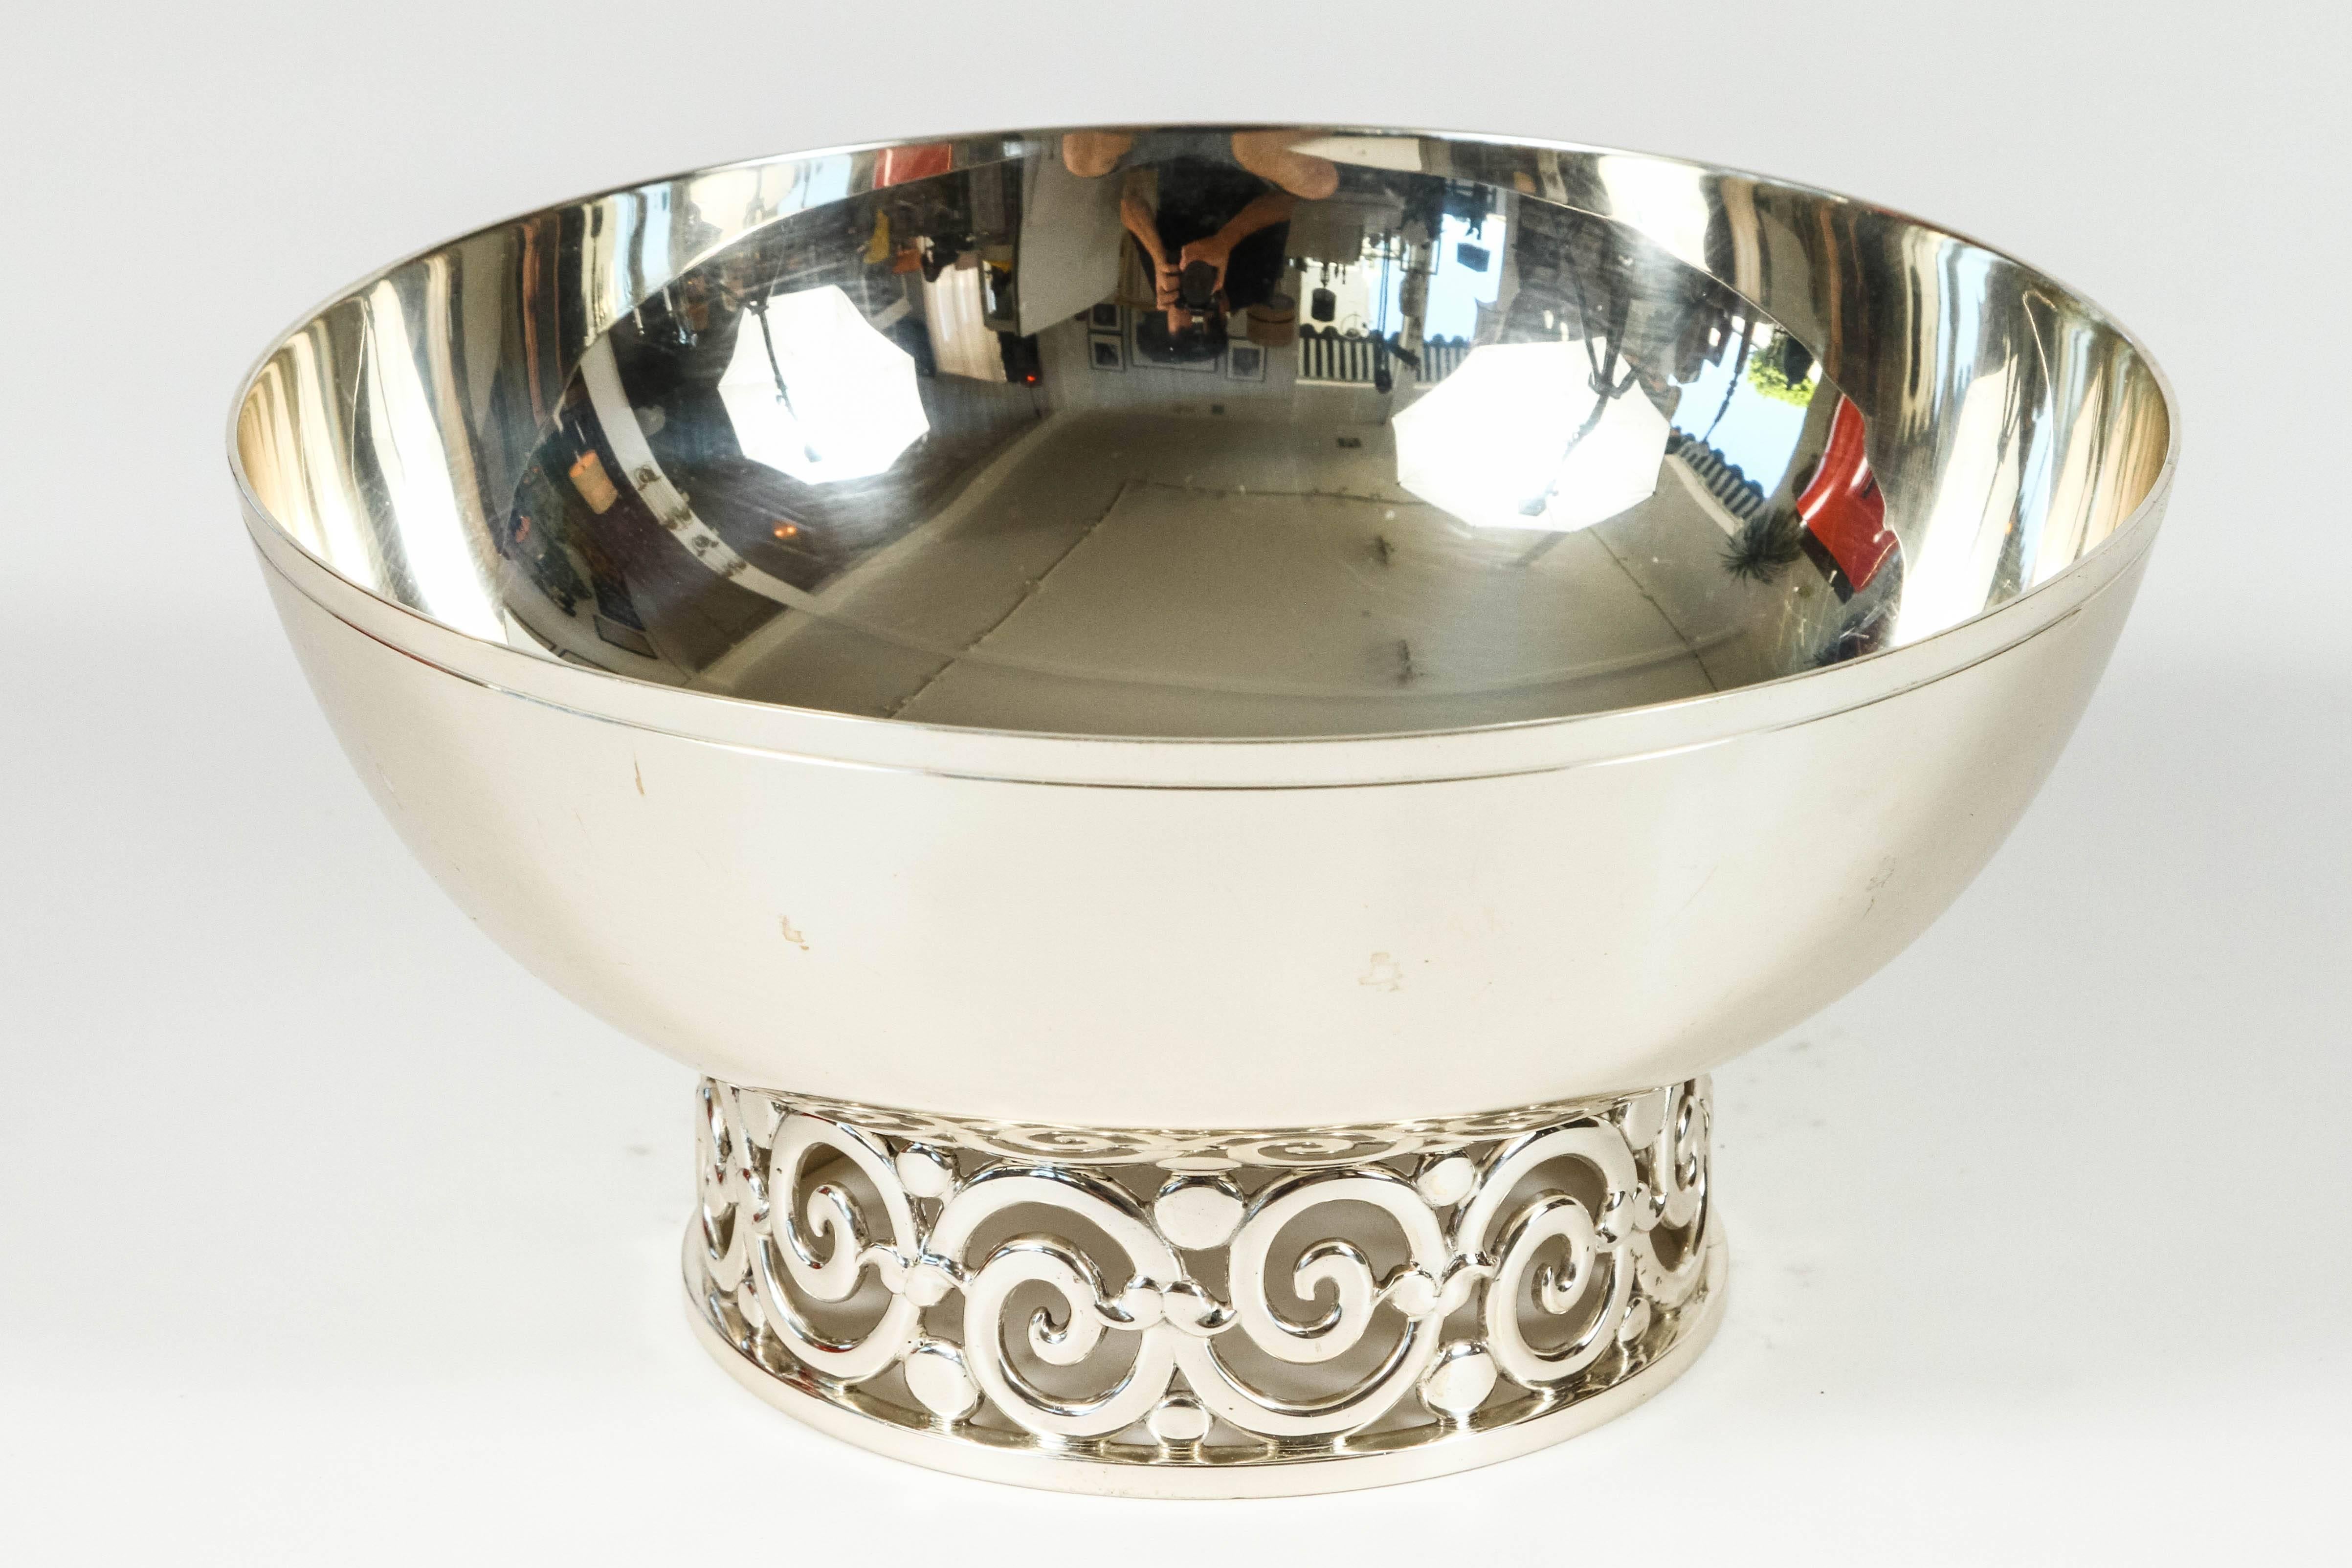 Elegant serving bowl by Tiffany & Co. is great for entertaining or as a decorative object on its own. The scrollwork base adds a nice focal point. The bowl is stamped on the underside: 